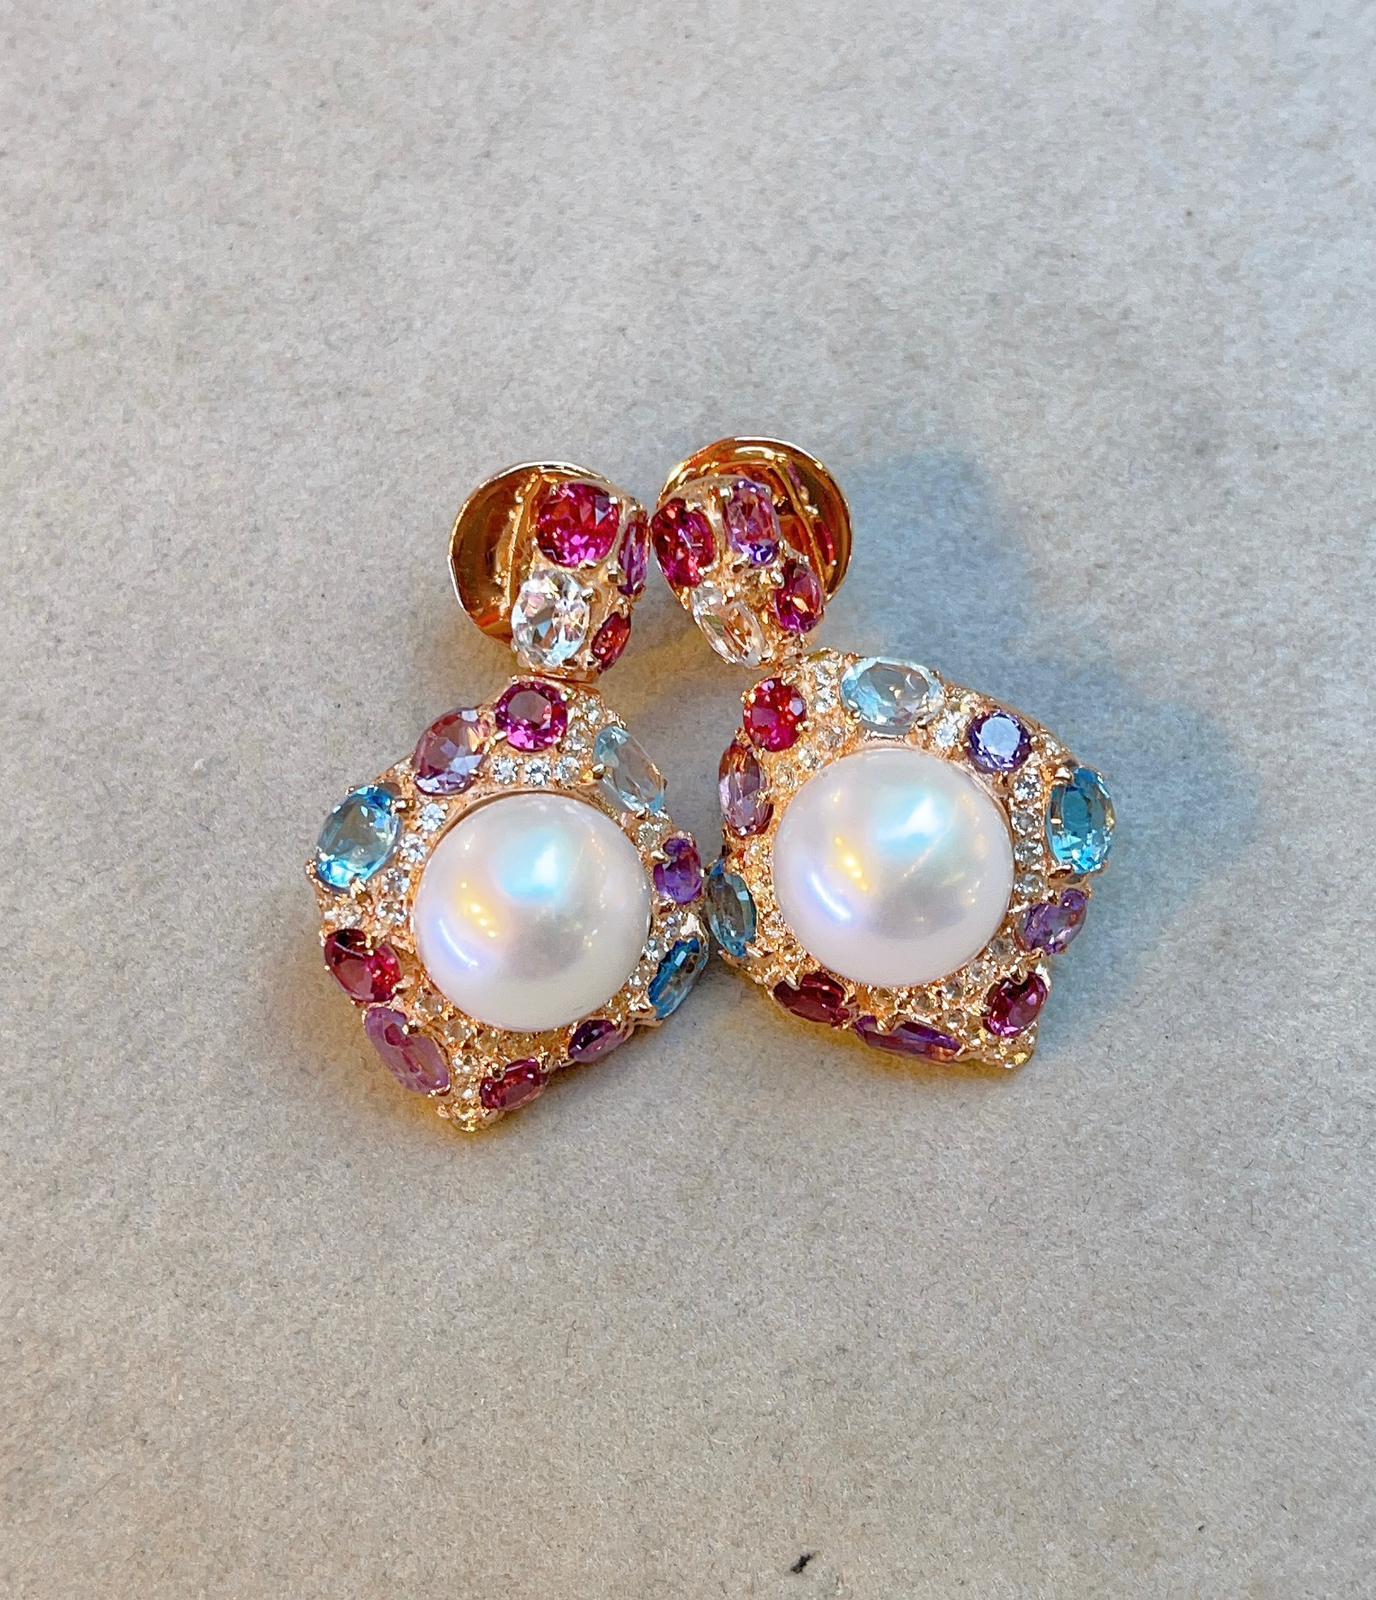 Oval Cut Bochic “Capri” South Sea Pearl Earrings with Natural Amethyst, Topaz & Rdorite For Sale